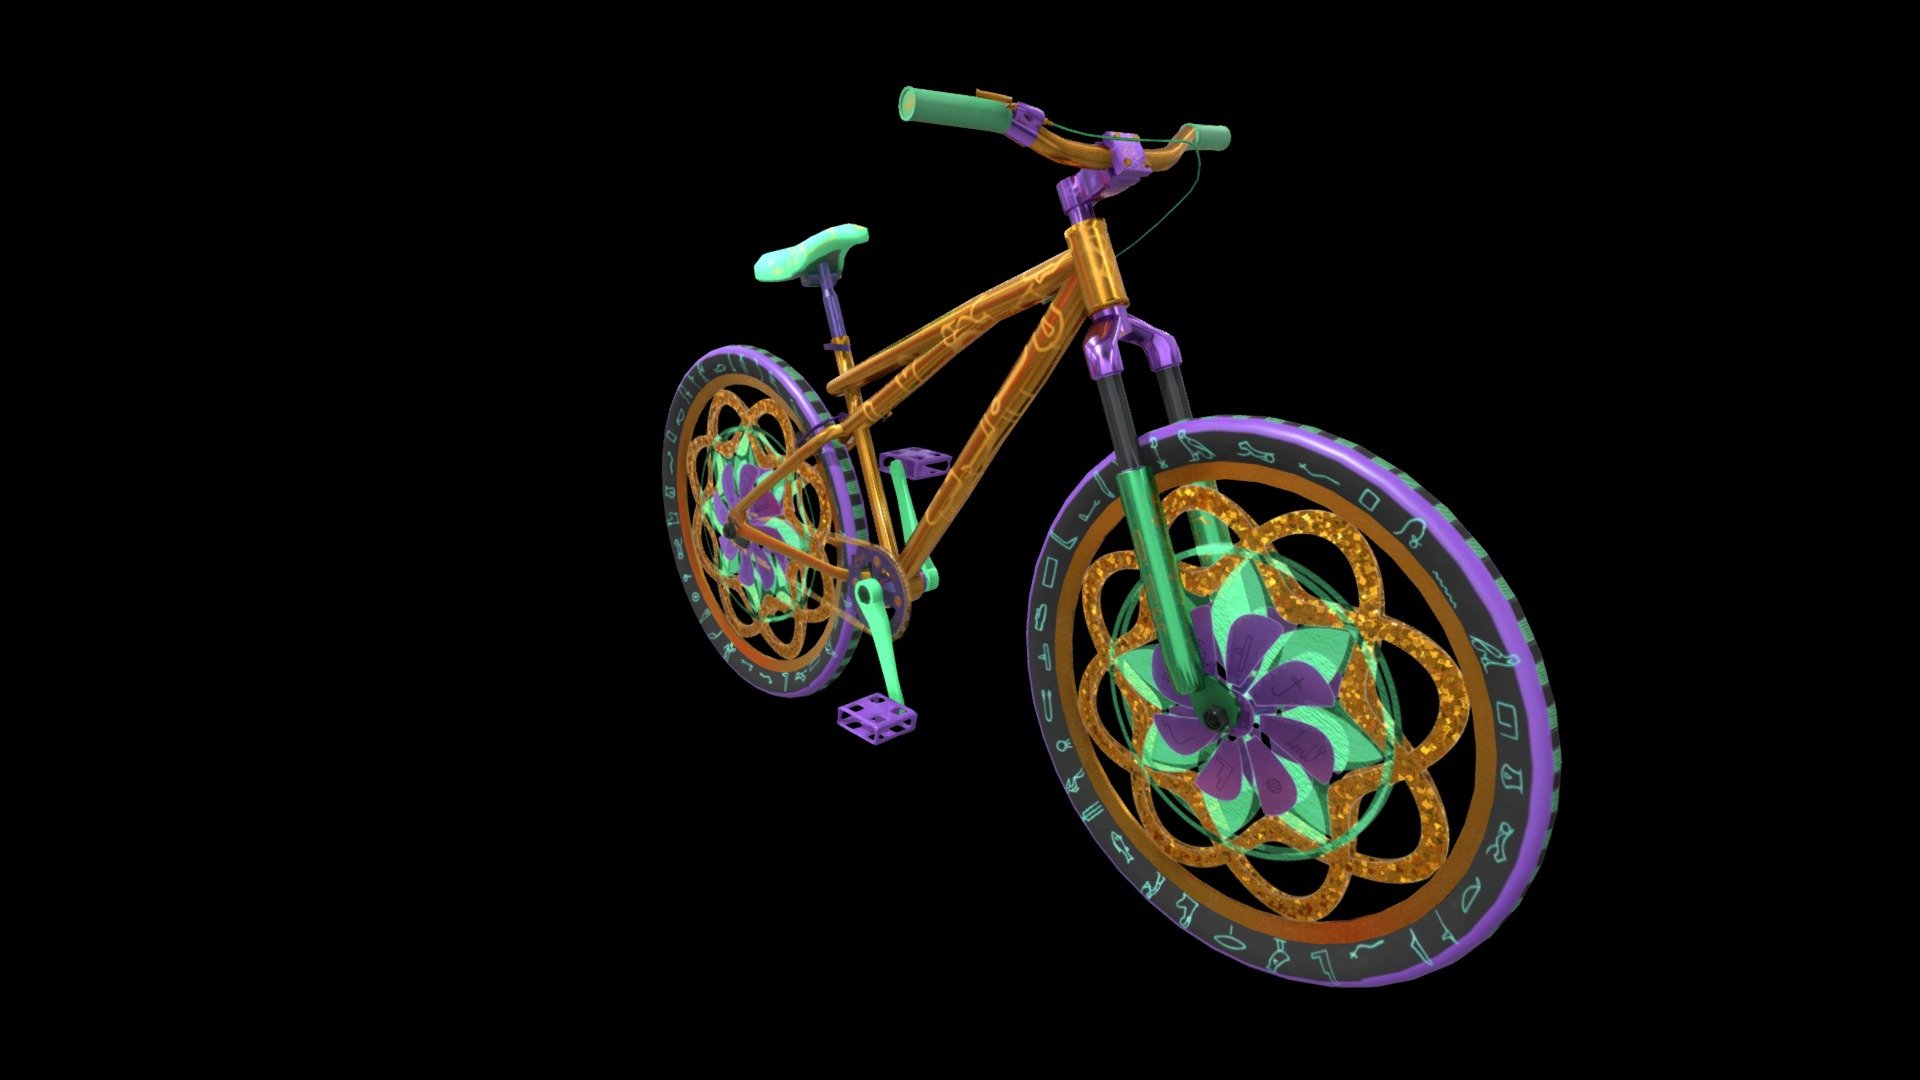 Become the pinnacle of opulence with this gold Pharaoh style bike.

Modeled in Maya and painted in Substance with PBR textures.

Includes Maya and Substance project files for easy game integration 3d model